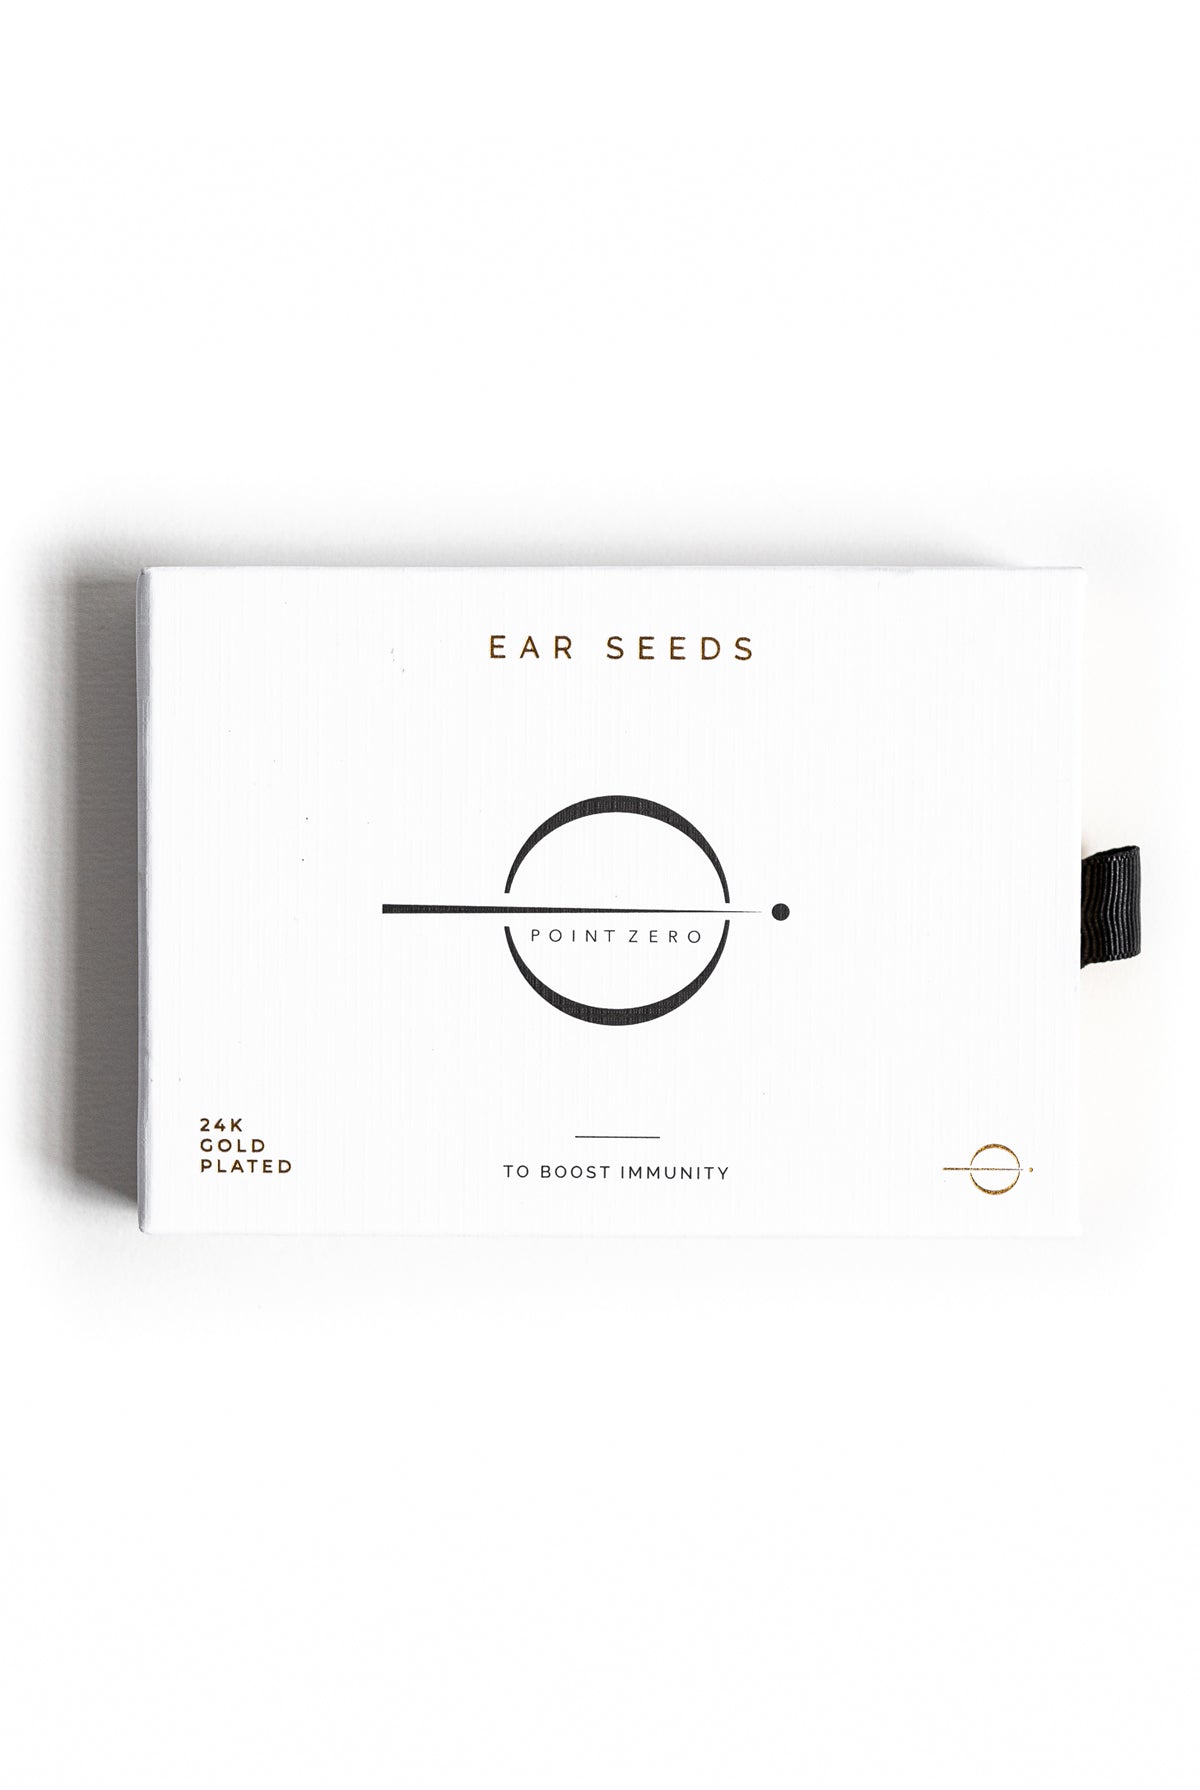 POINT ZERO Ear Seeds - Boost Immunity - One Size Gold